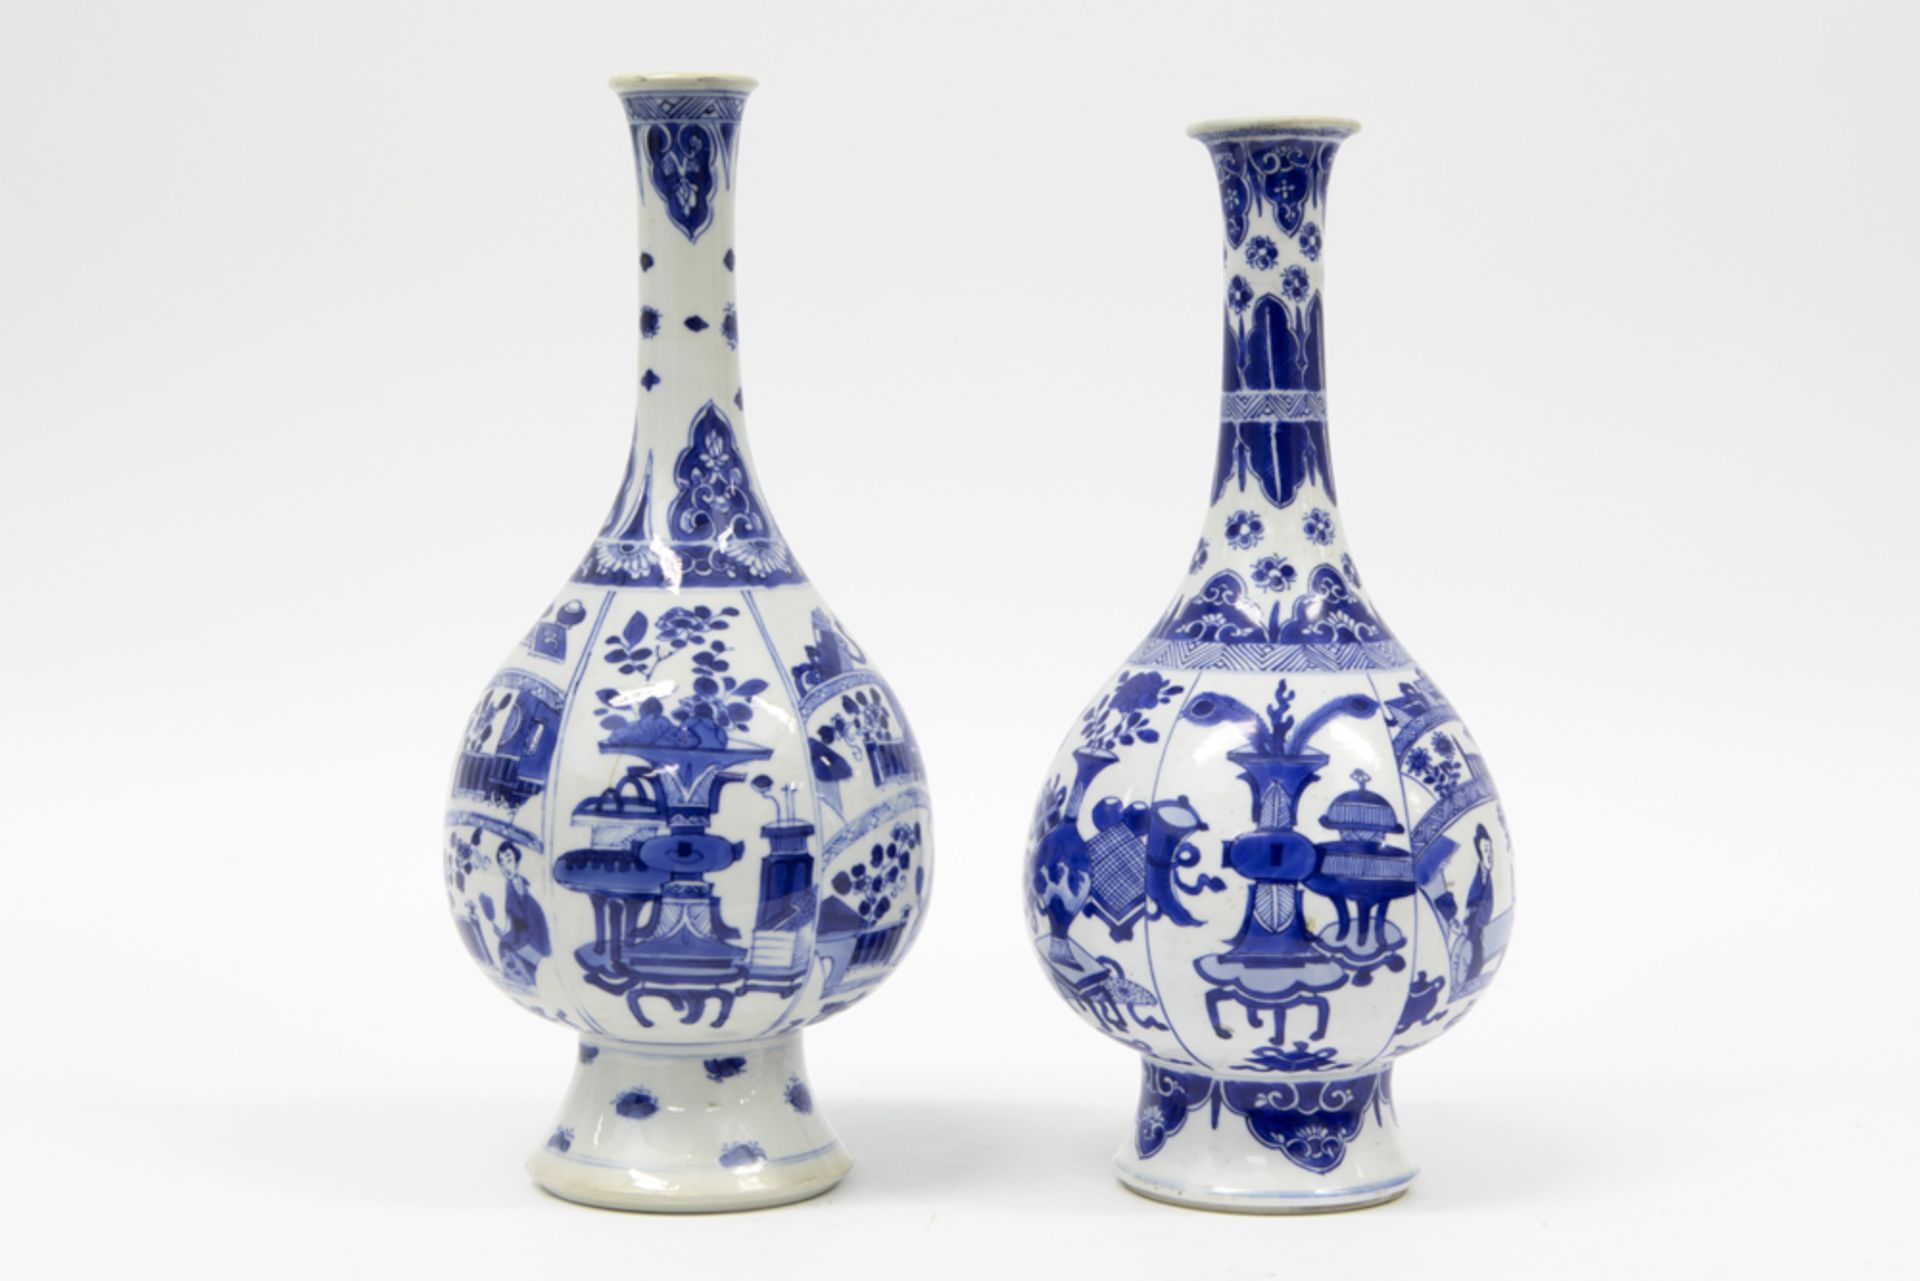 two 17th/18th Cent. Chinese Kang Hsi period vases in porcelain with finely executed blue-white